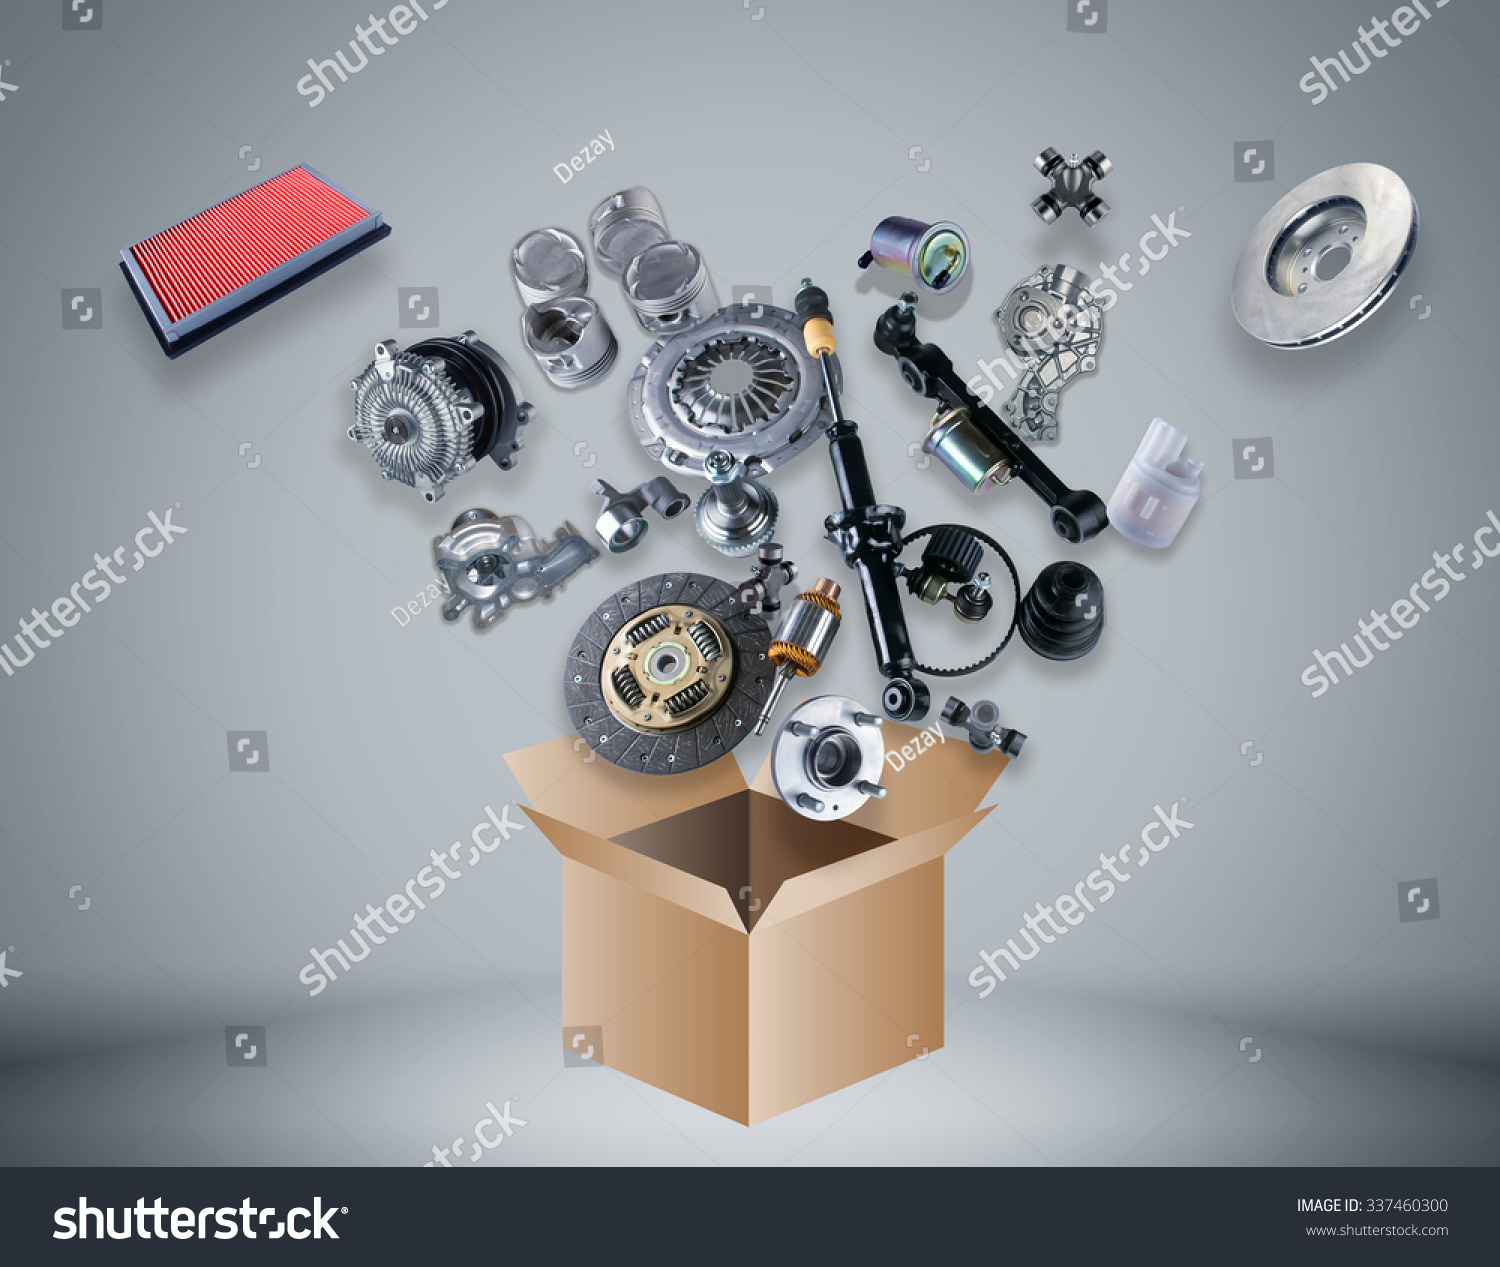 Many spare parts flying out of the box gray background. Isolated auto spare parts on gray background. Auto spare parts for passenger car, OEM. Isolated absorber, gasket, filters, parts for chassis. #337460300